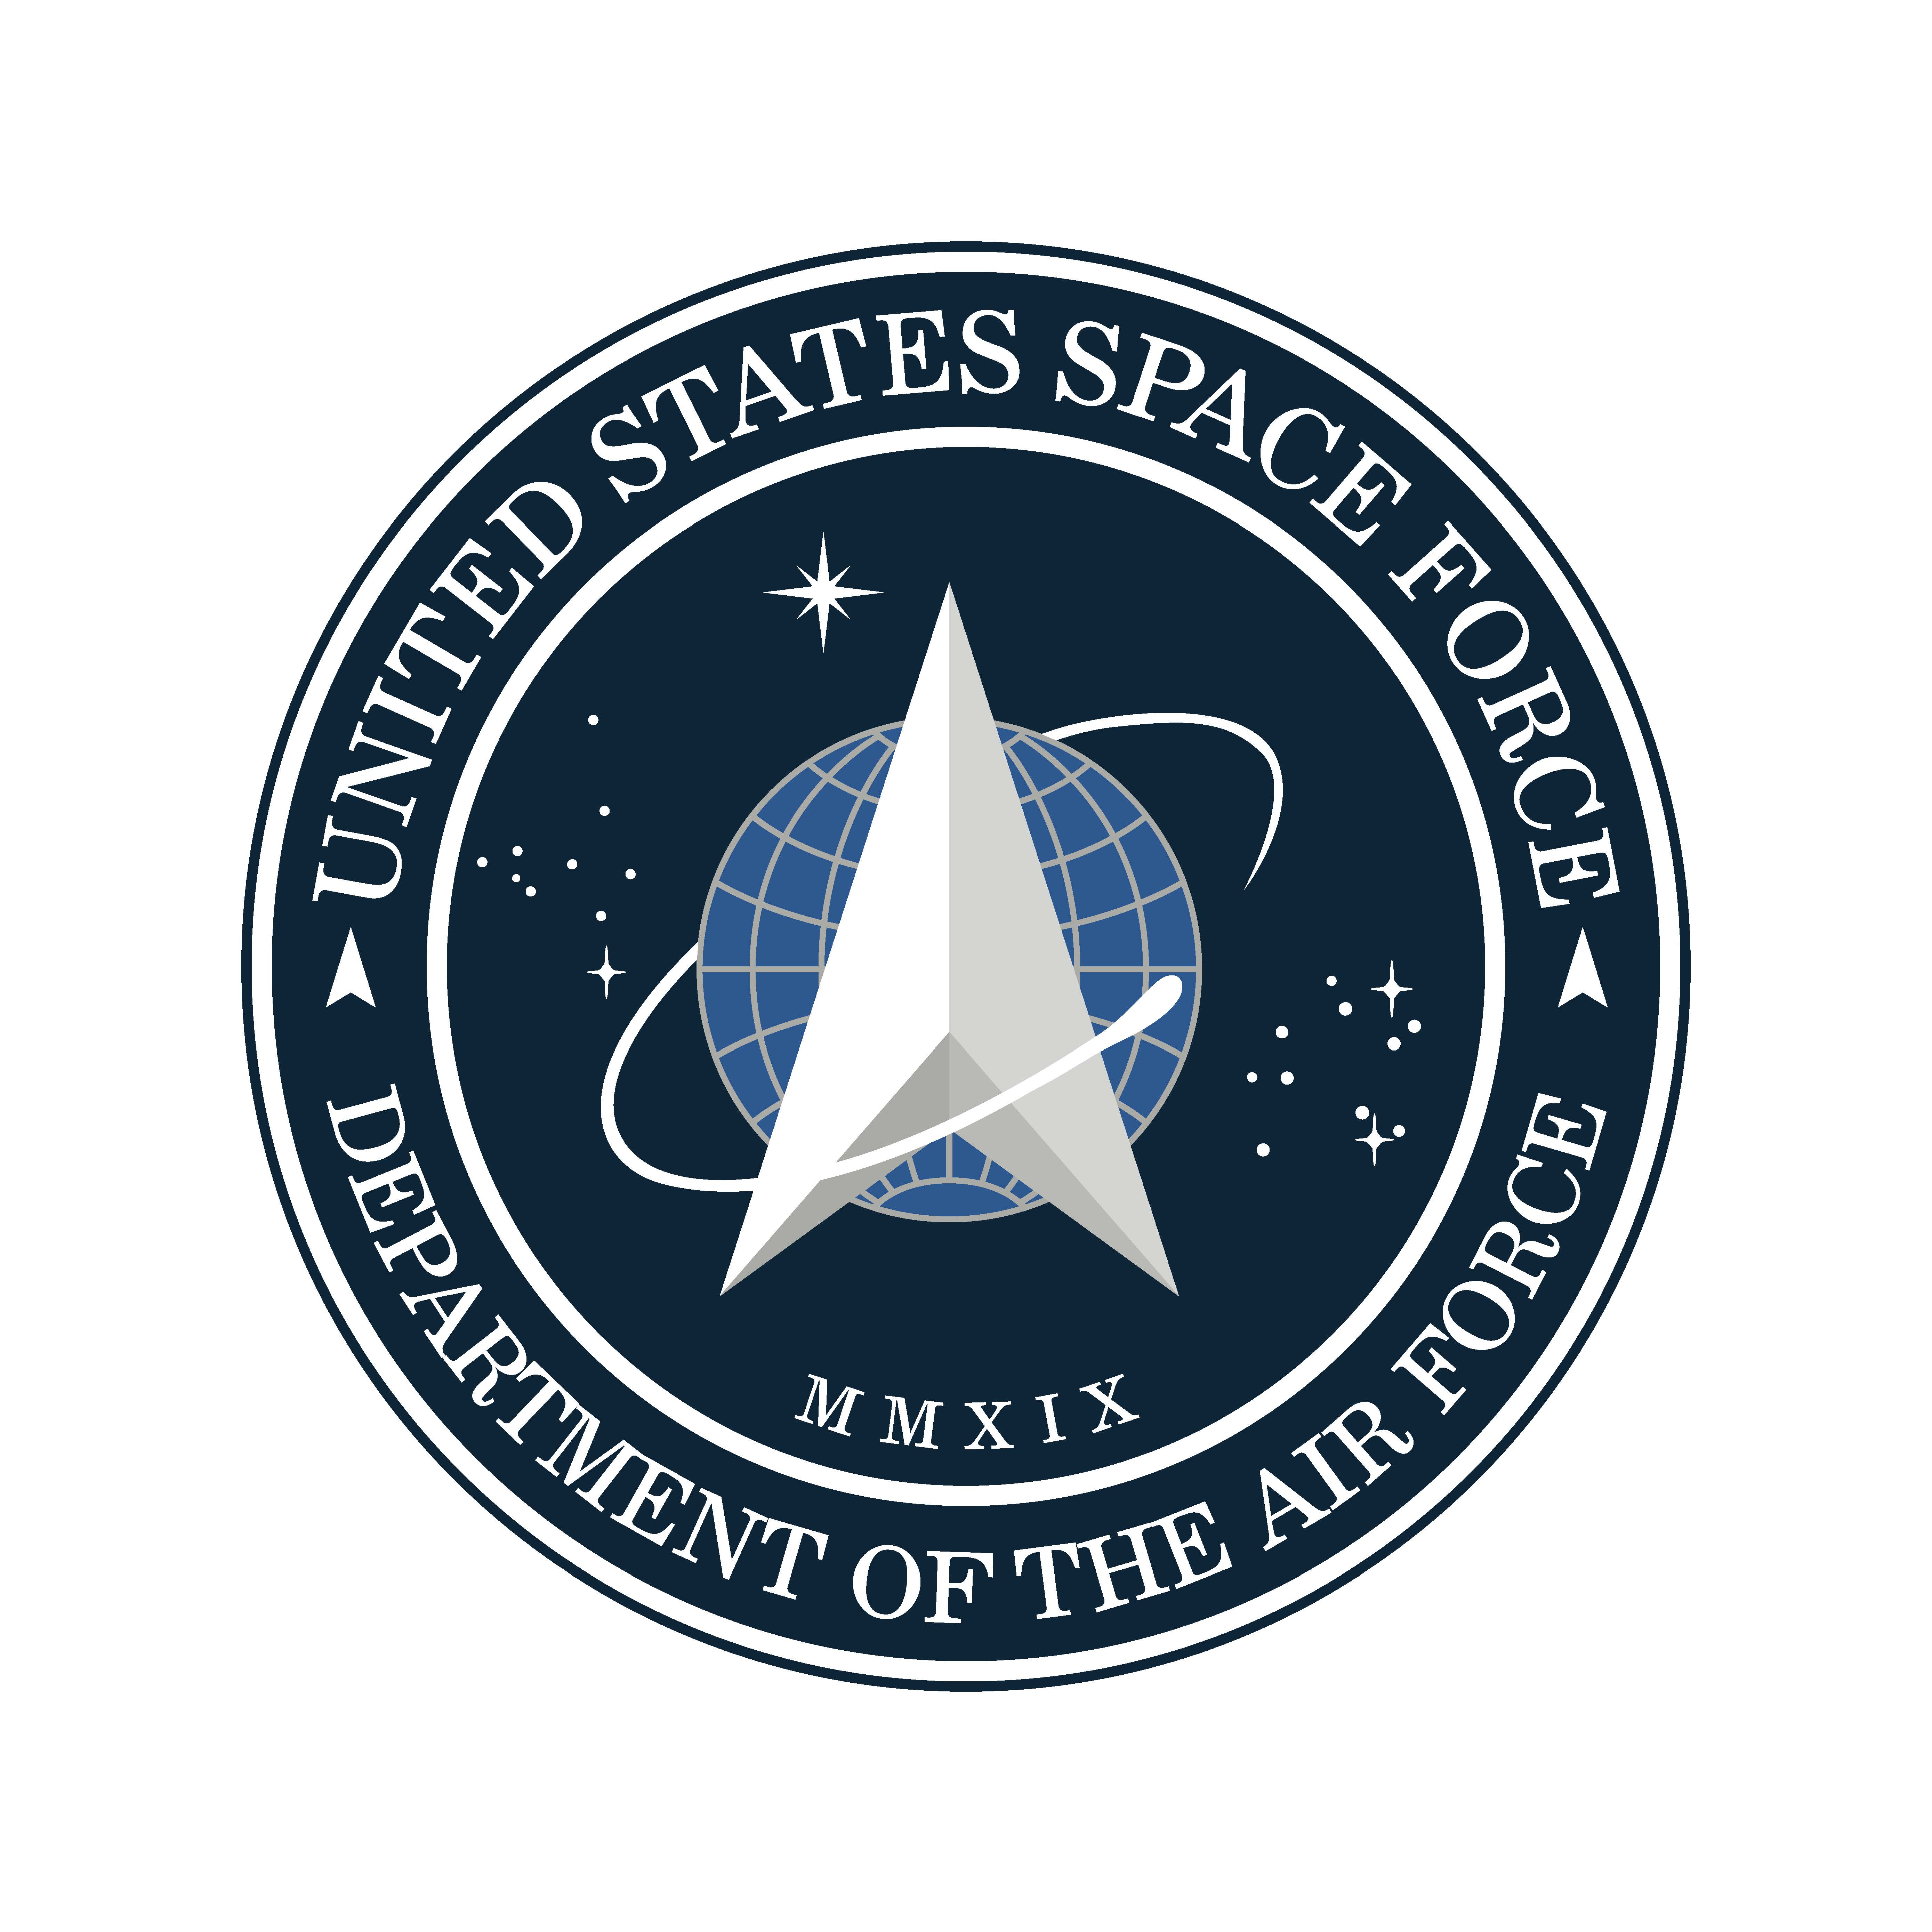 Emblem of the United States Space Force